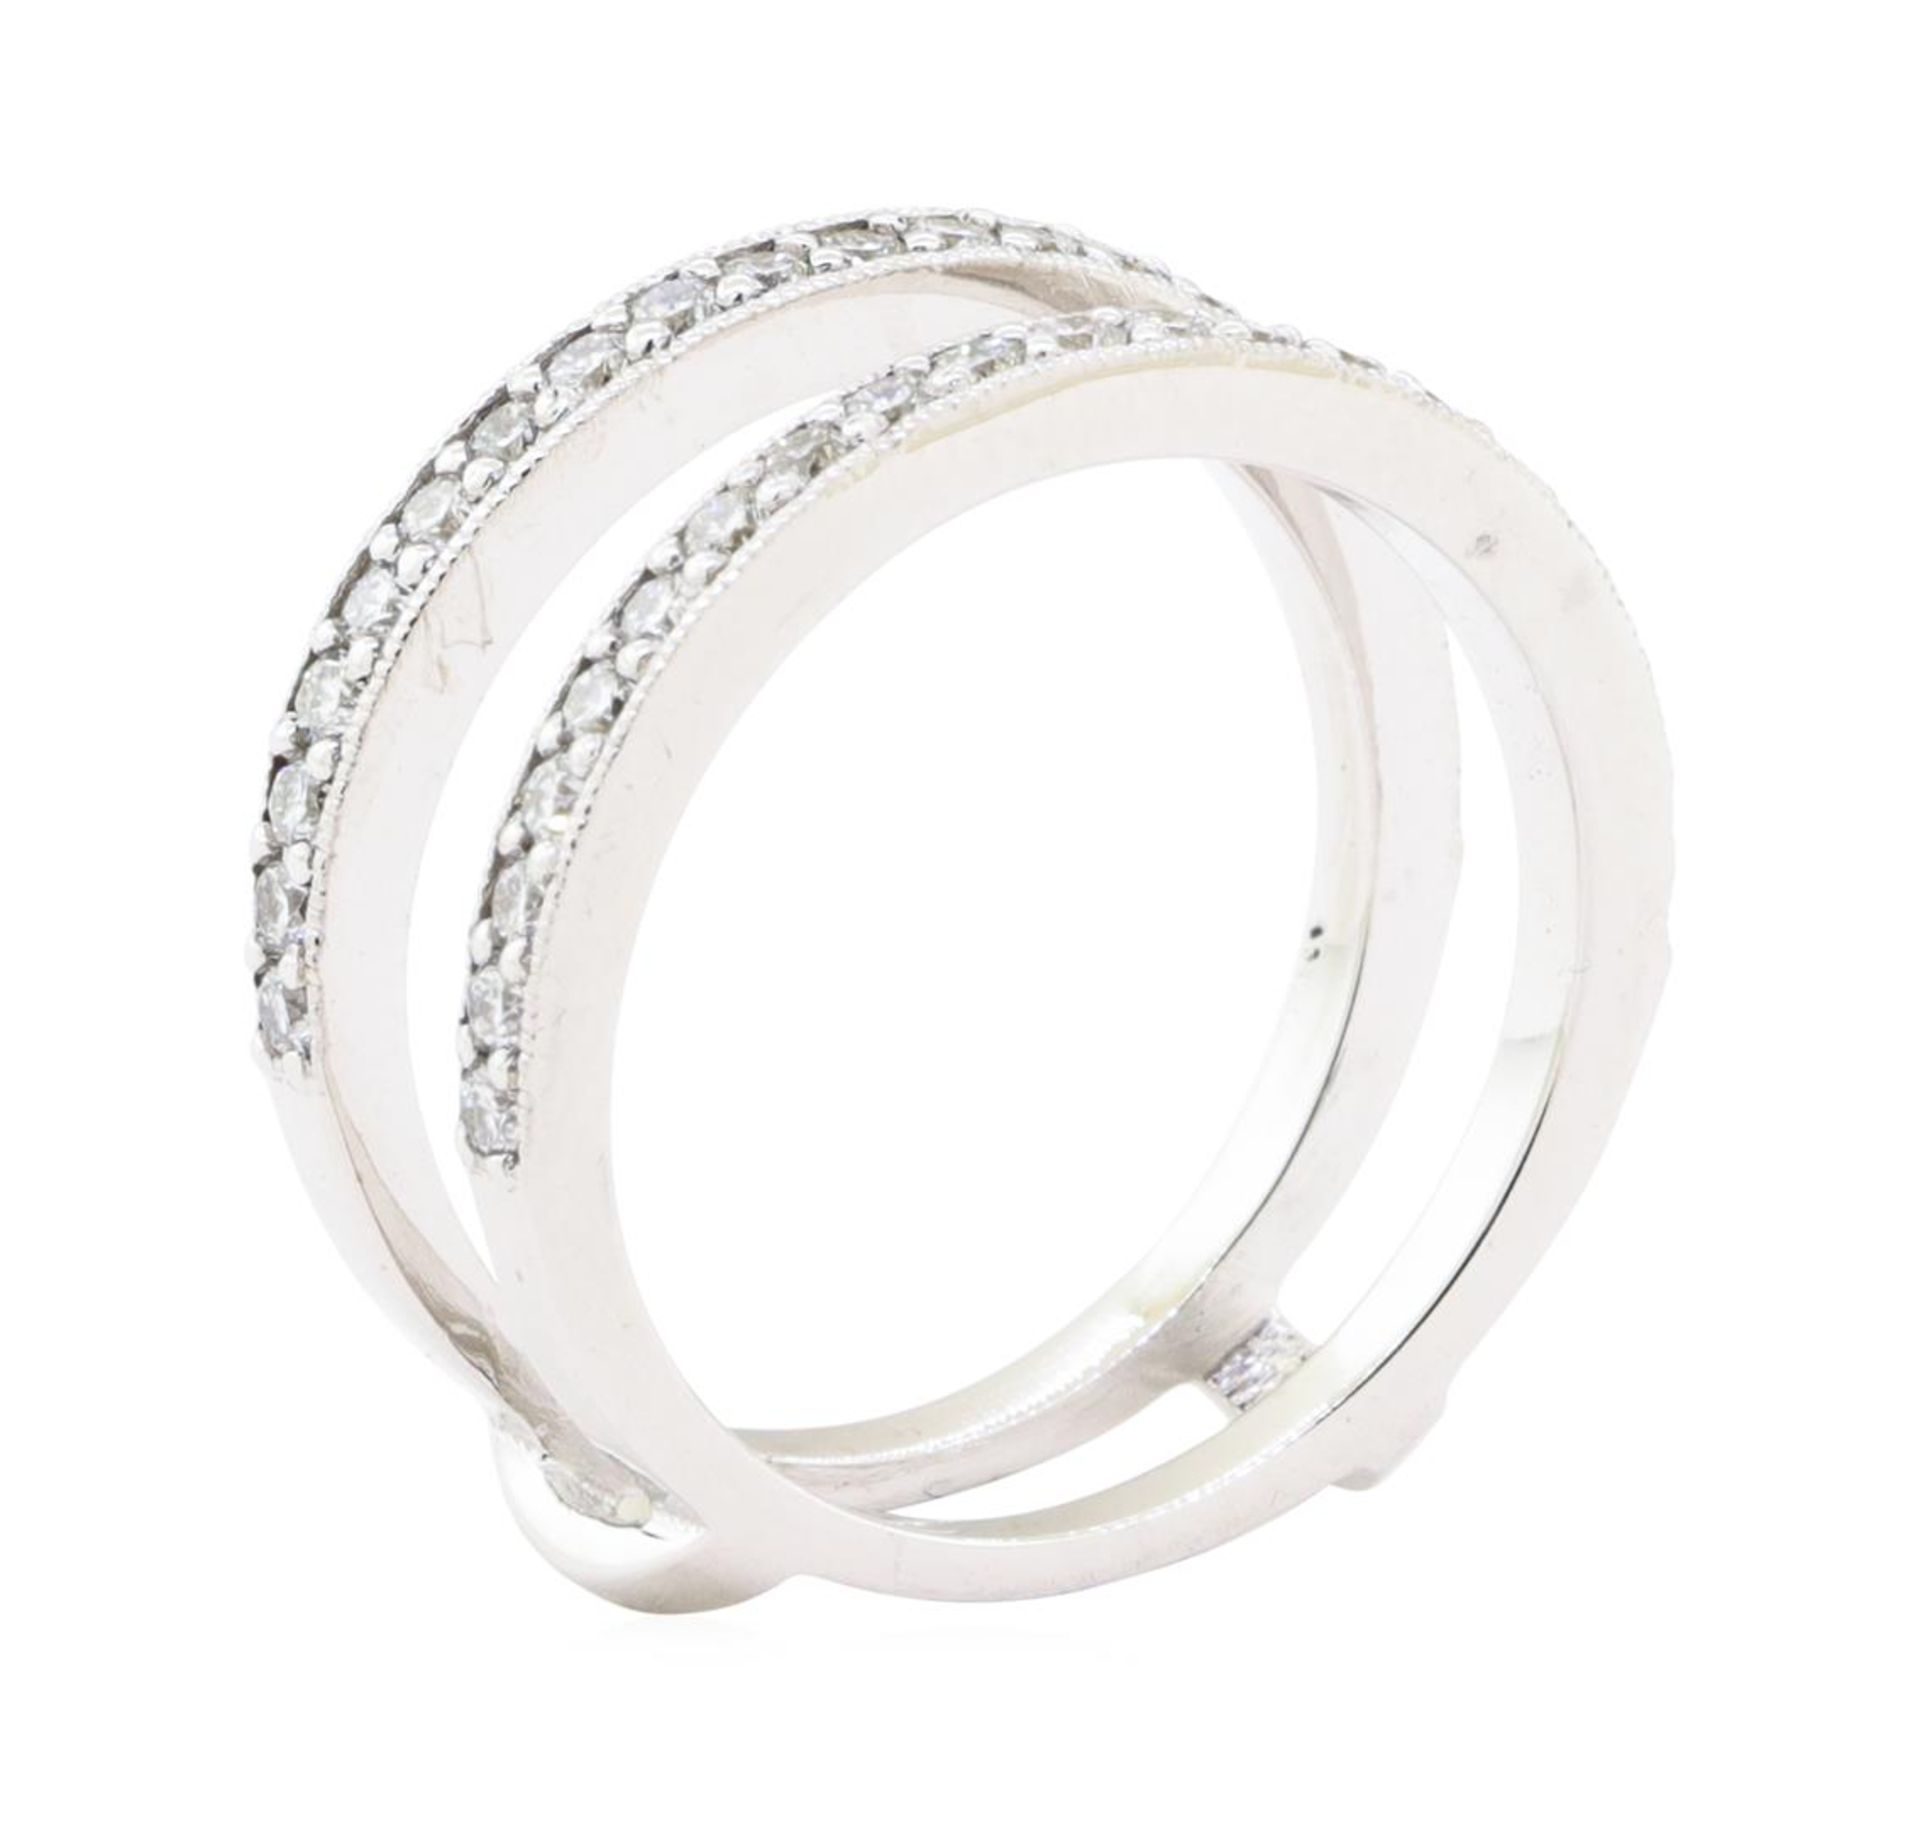 0.60 ctw Diamond Double Row Ring Guard - 14KT White Gold - Image 4 of 4